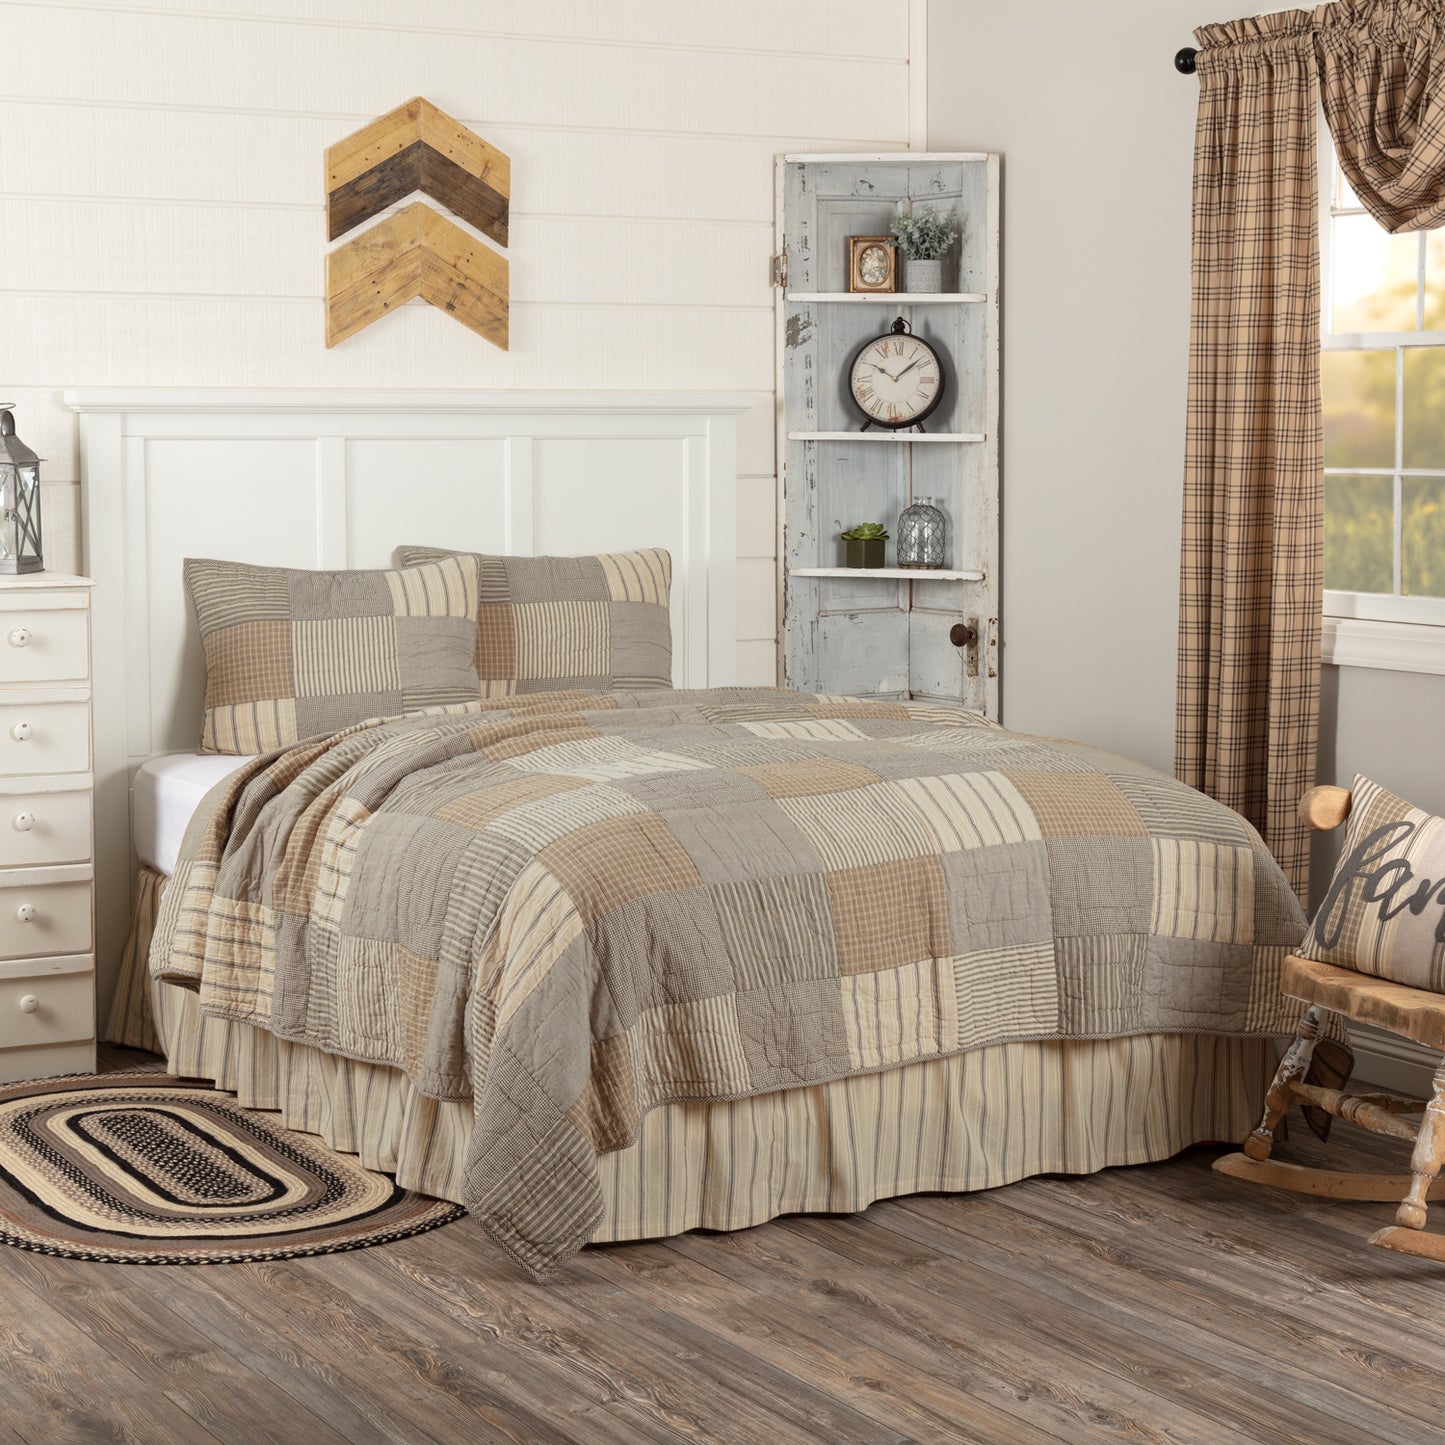 VHC Brands Sawyer Mill Queen Quilt with Two Shams SPEND $200 - GET 20% OFF